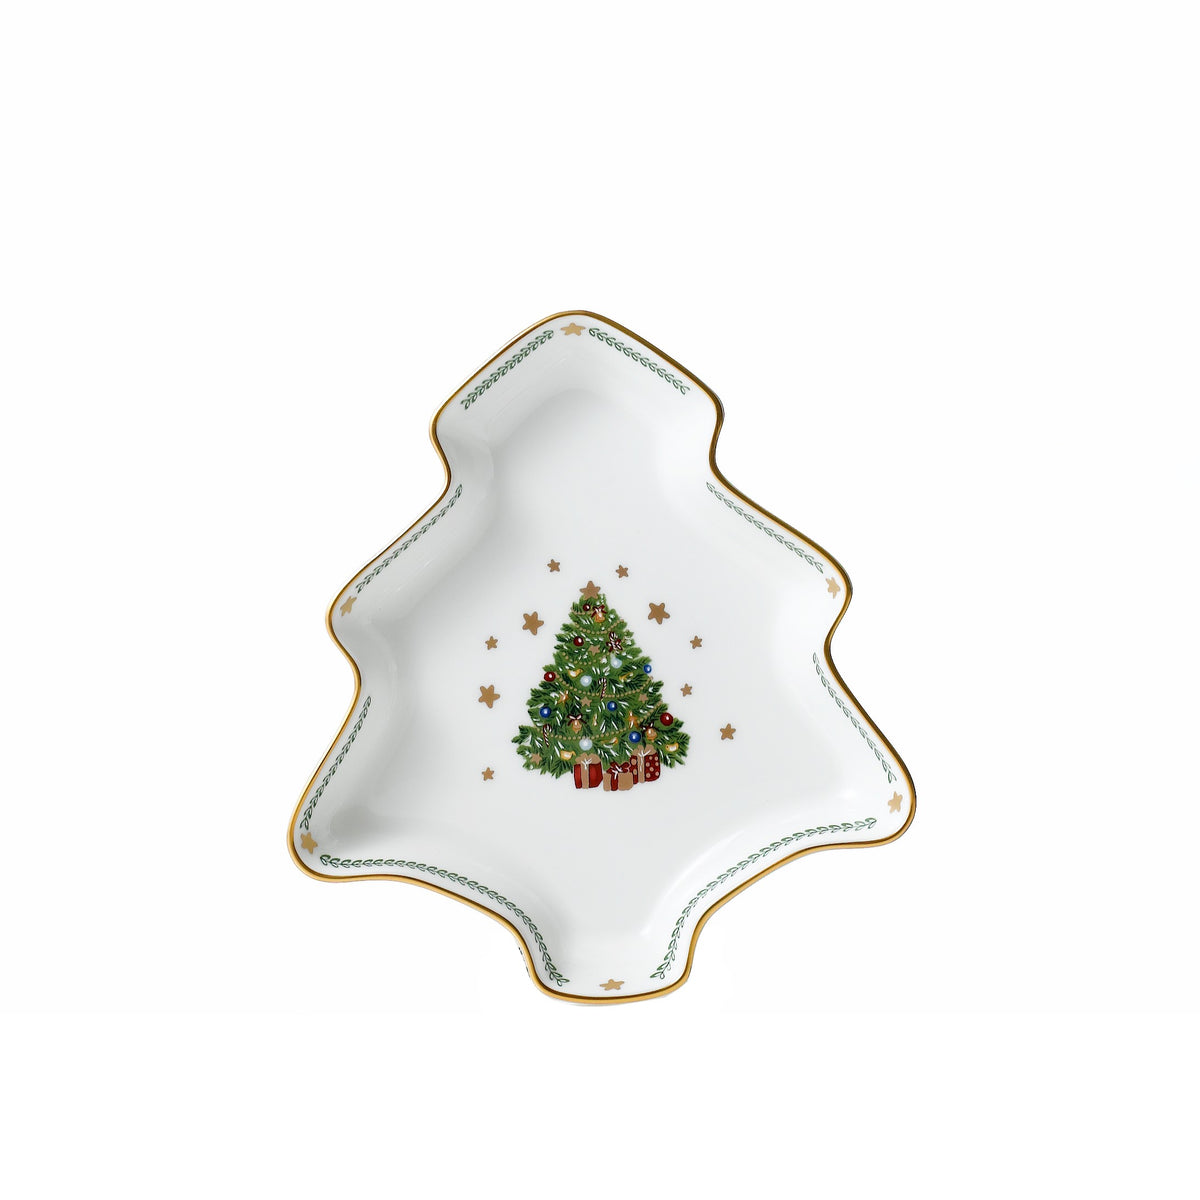 My Noel Small Tree Plate White Background Photo